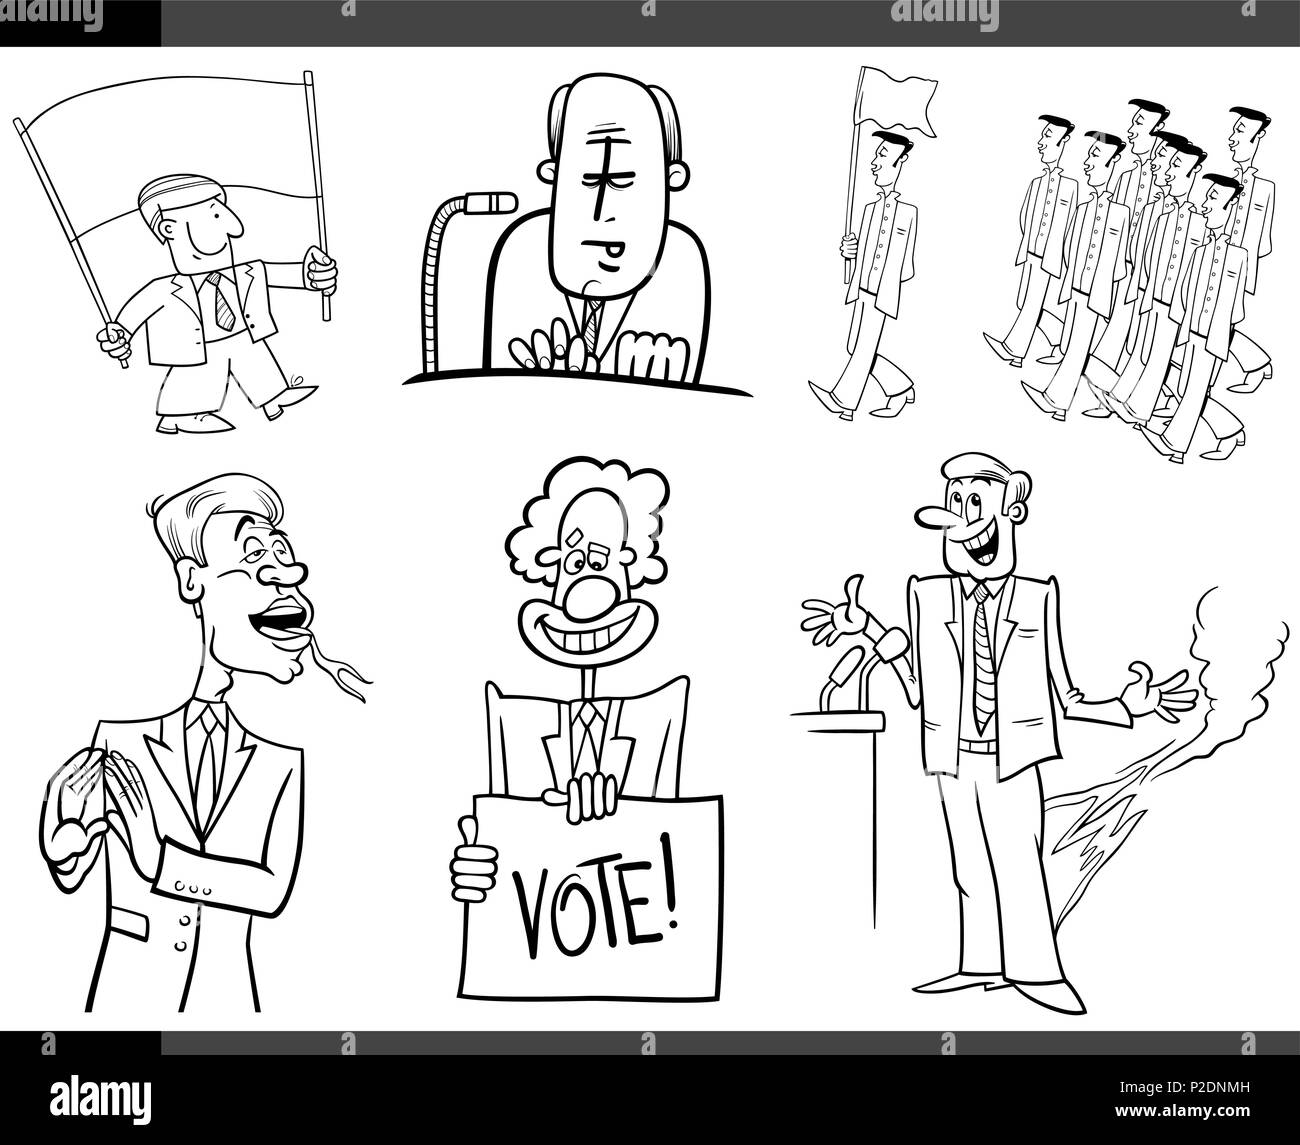 Black and White Set of Humorous Cartoon Concept Illustrations of Politics and Politicians Stock Vector